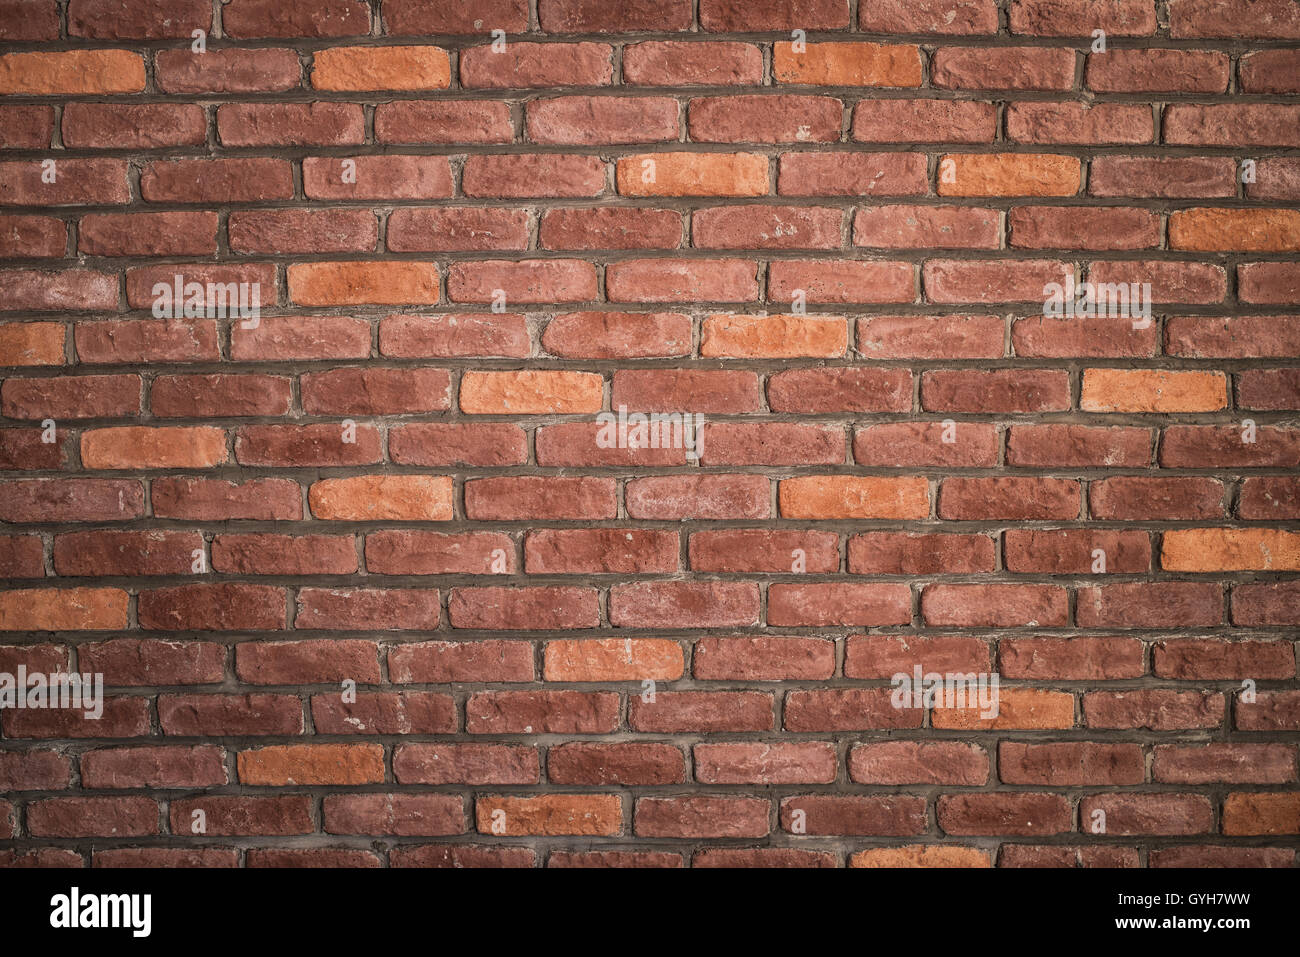 Background of red brick wall pattern texture. Great for graffiti inscriptions. Stock Photo